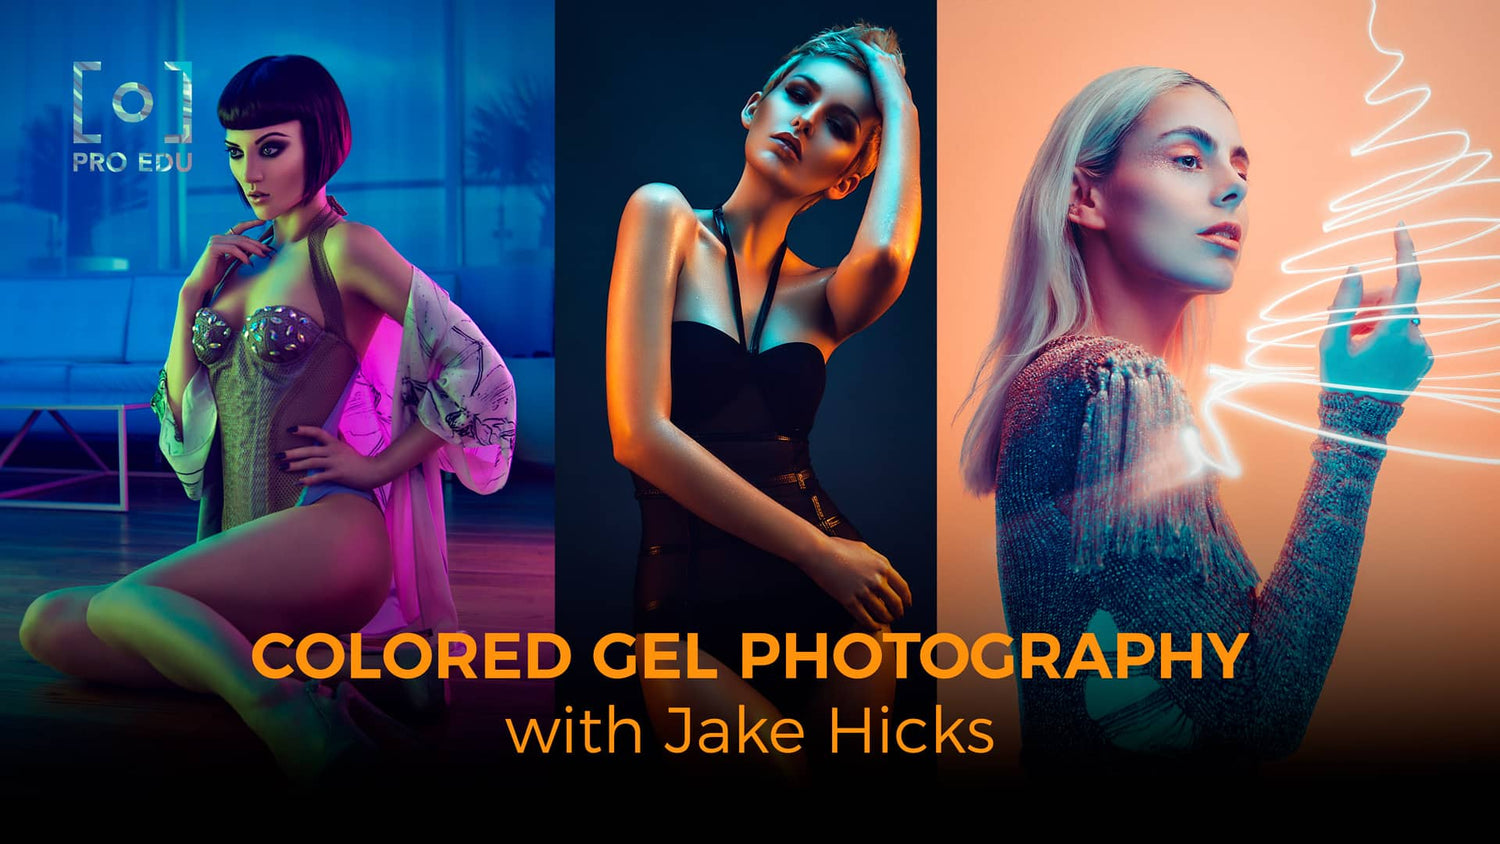 colored gel portrait photography examples in a free tutorial from pro edu and jake hicks